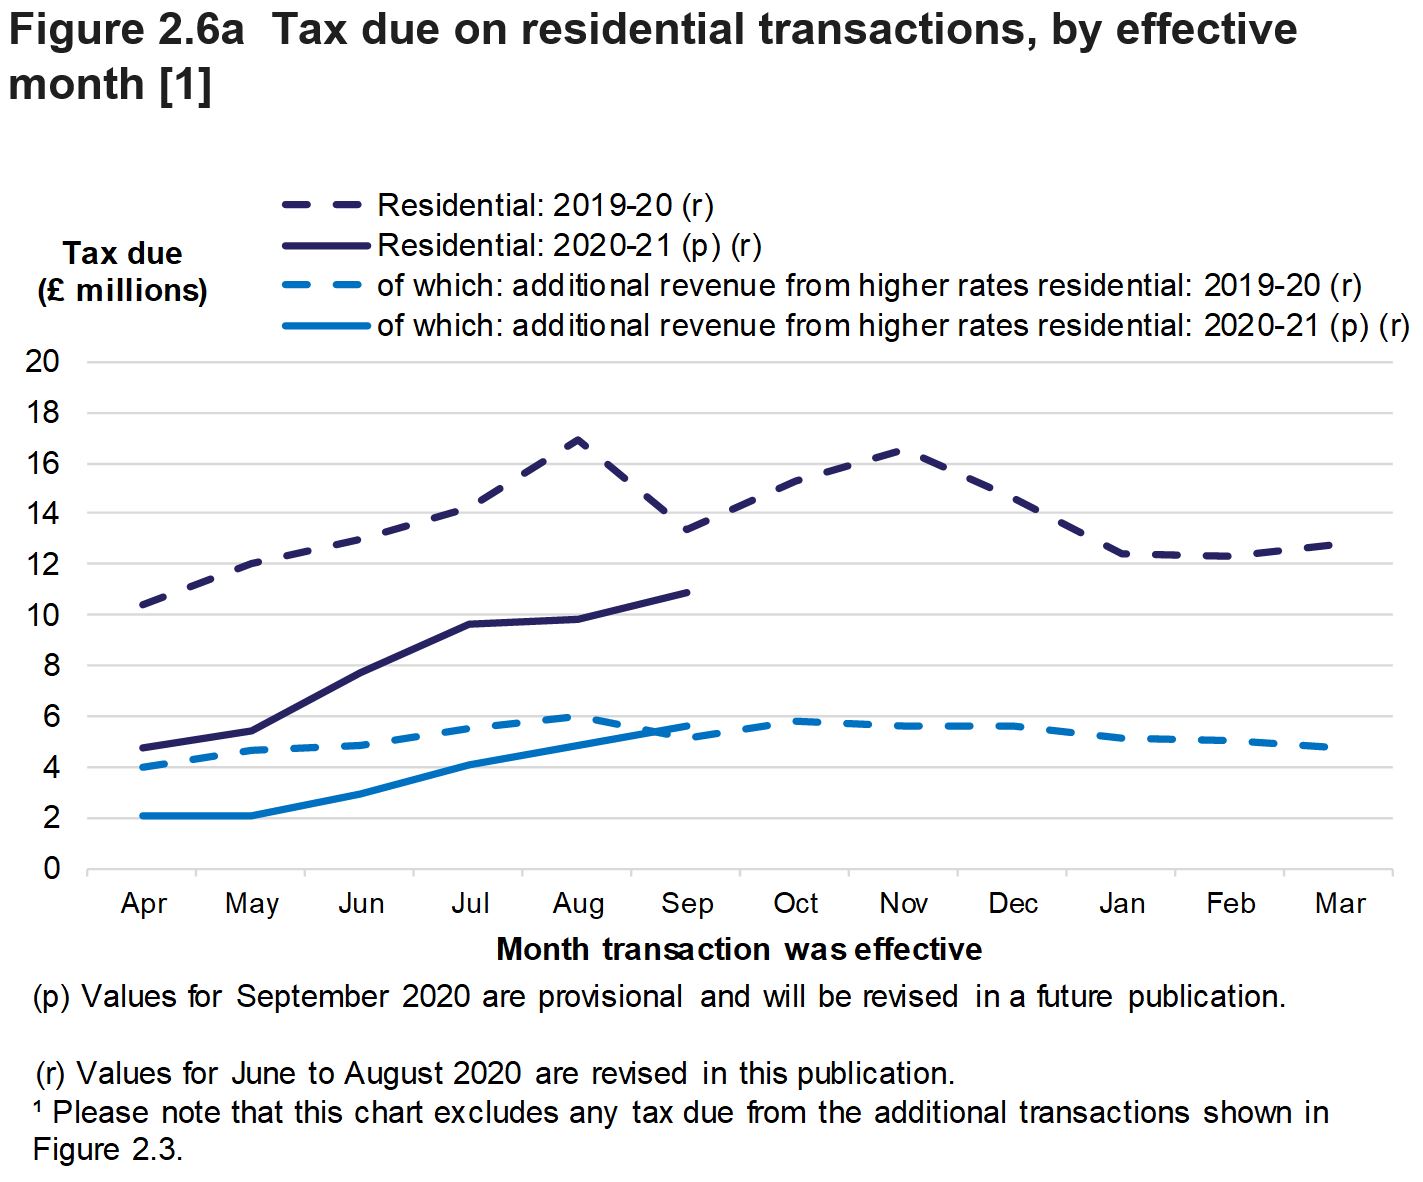 Figure 2.6a shows the monthly amount of tax due on reported notifiable transactions from April 2019 to September 2020, for residential transactions.